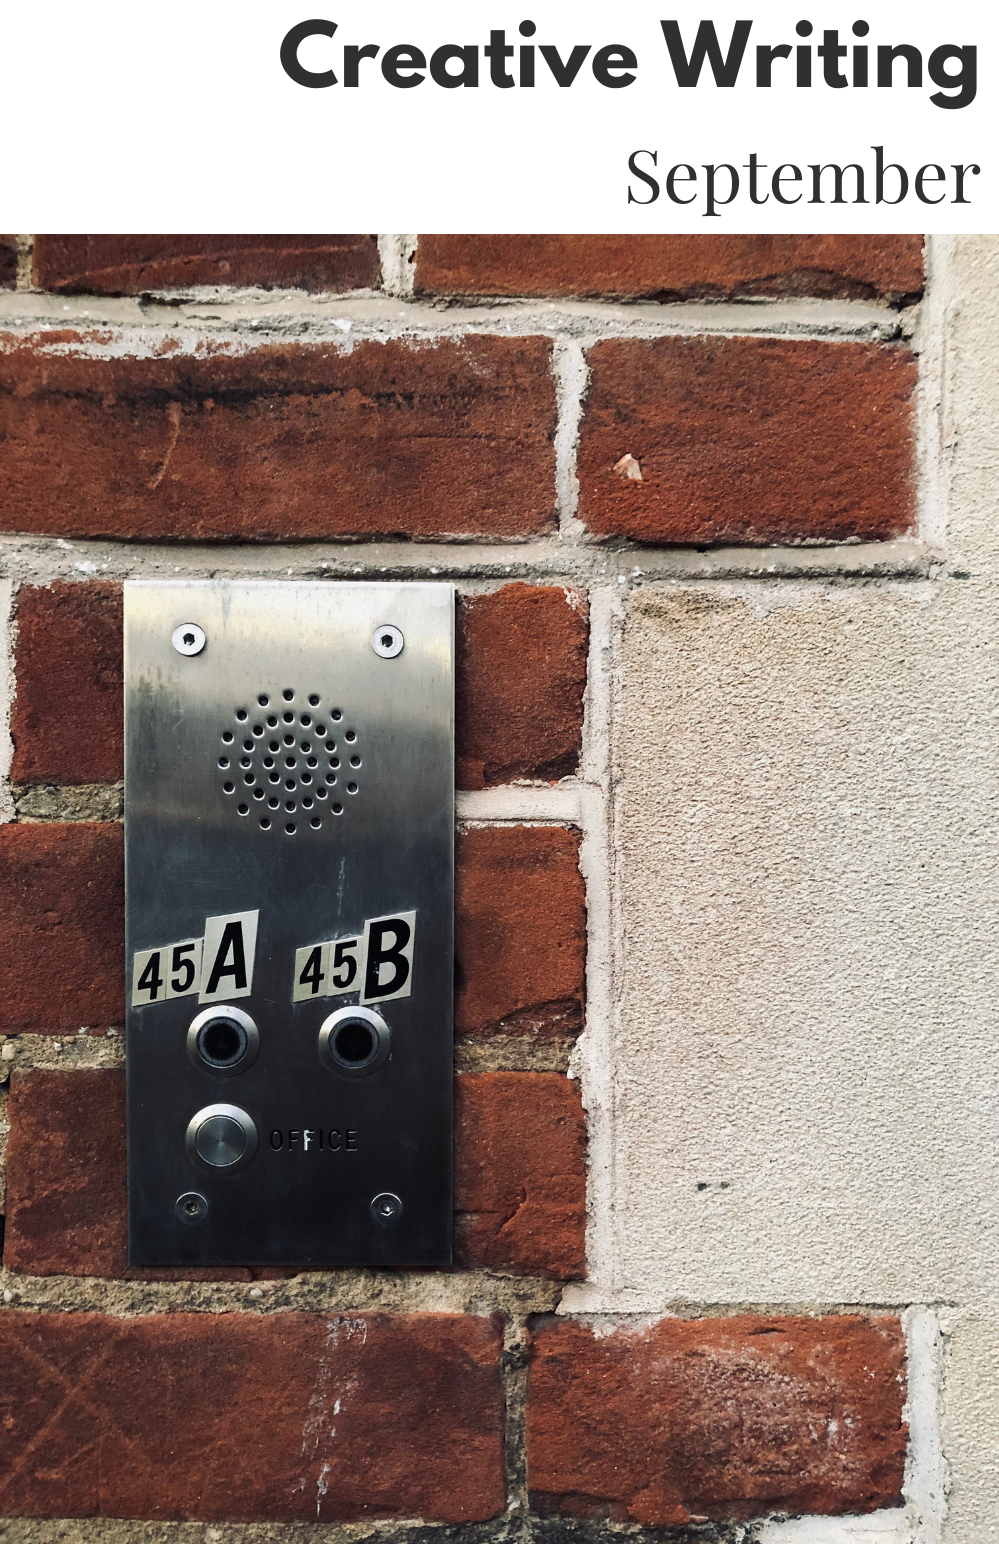 Image of an intercom hanging on a brick wall, with 45A and 45B on the intercom. 